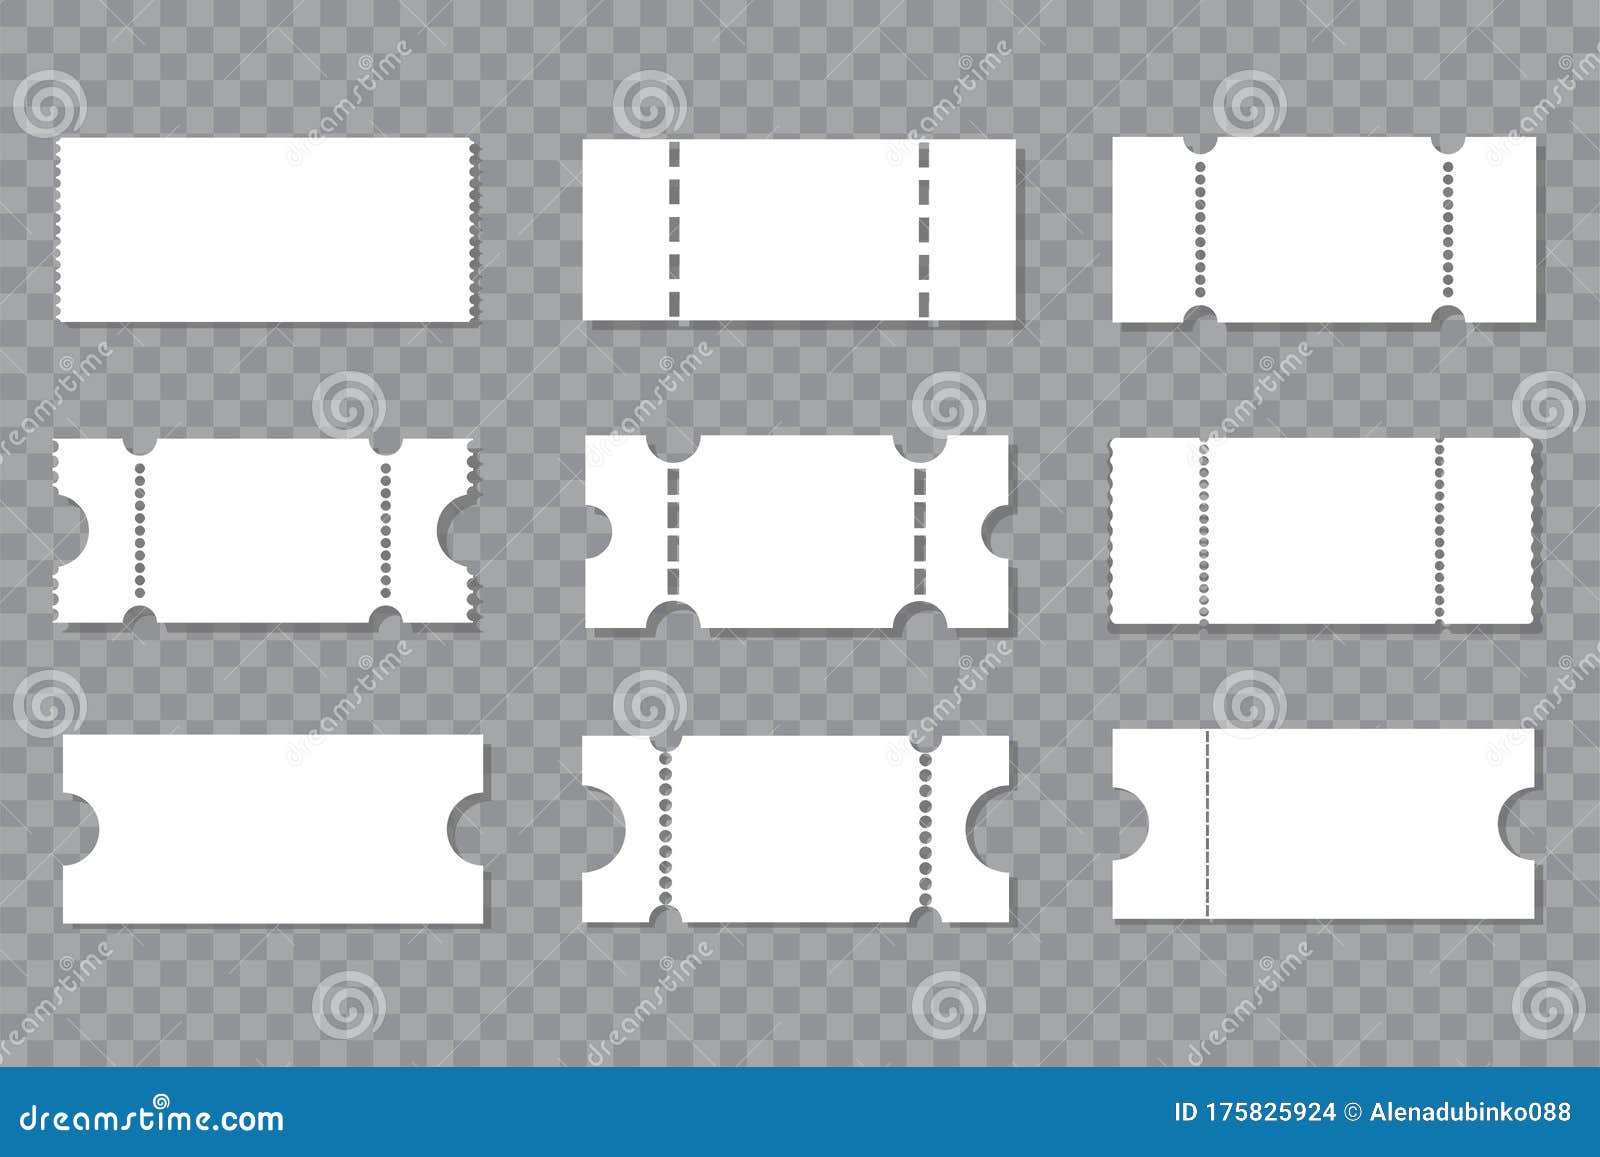 Set Blank Ticket Template. Concert, Movie Or Theater Ticket